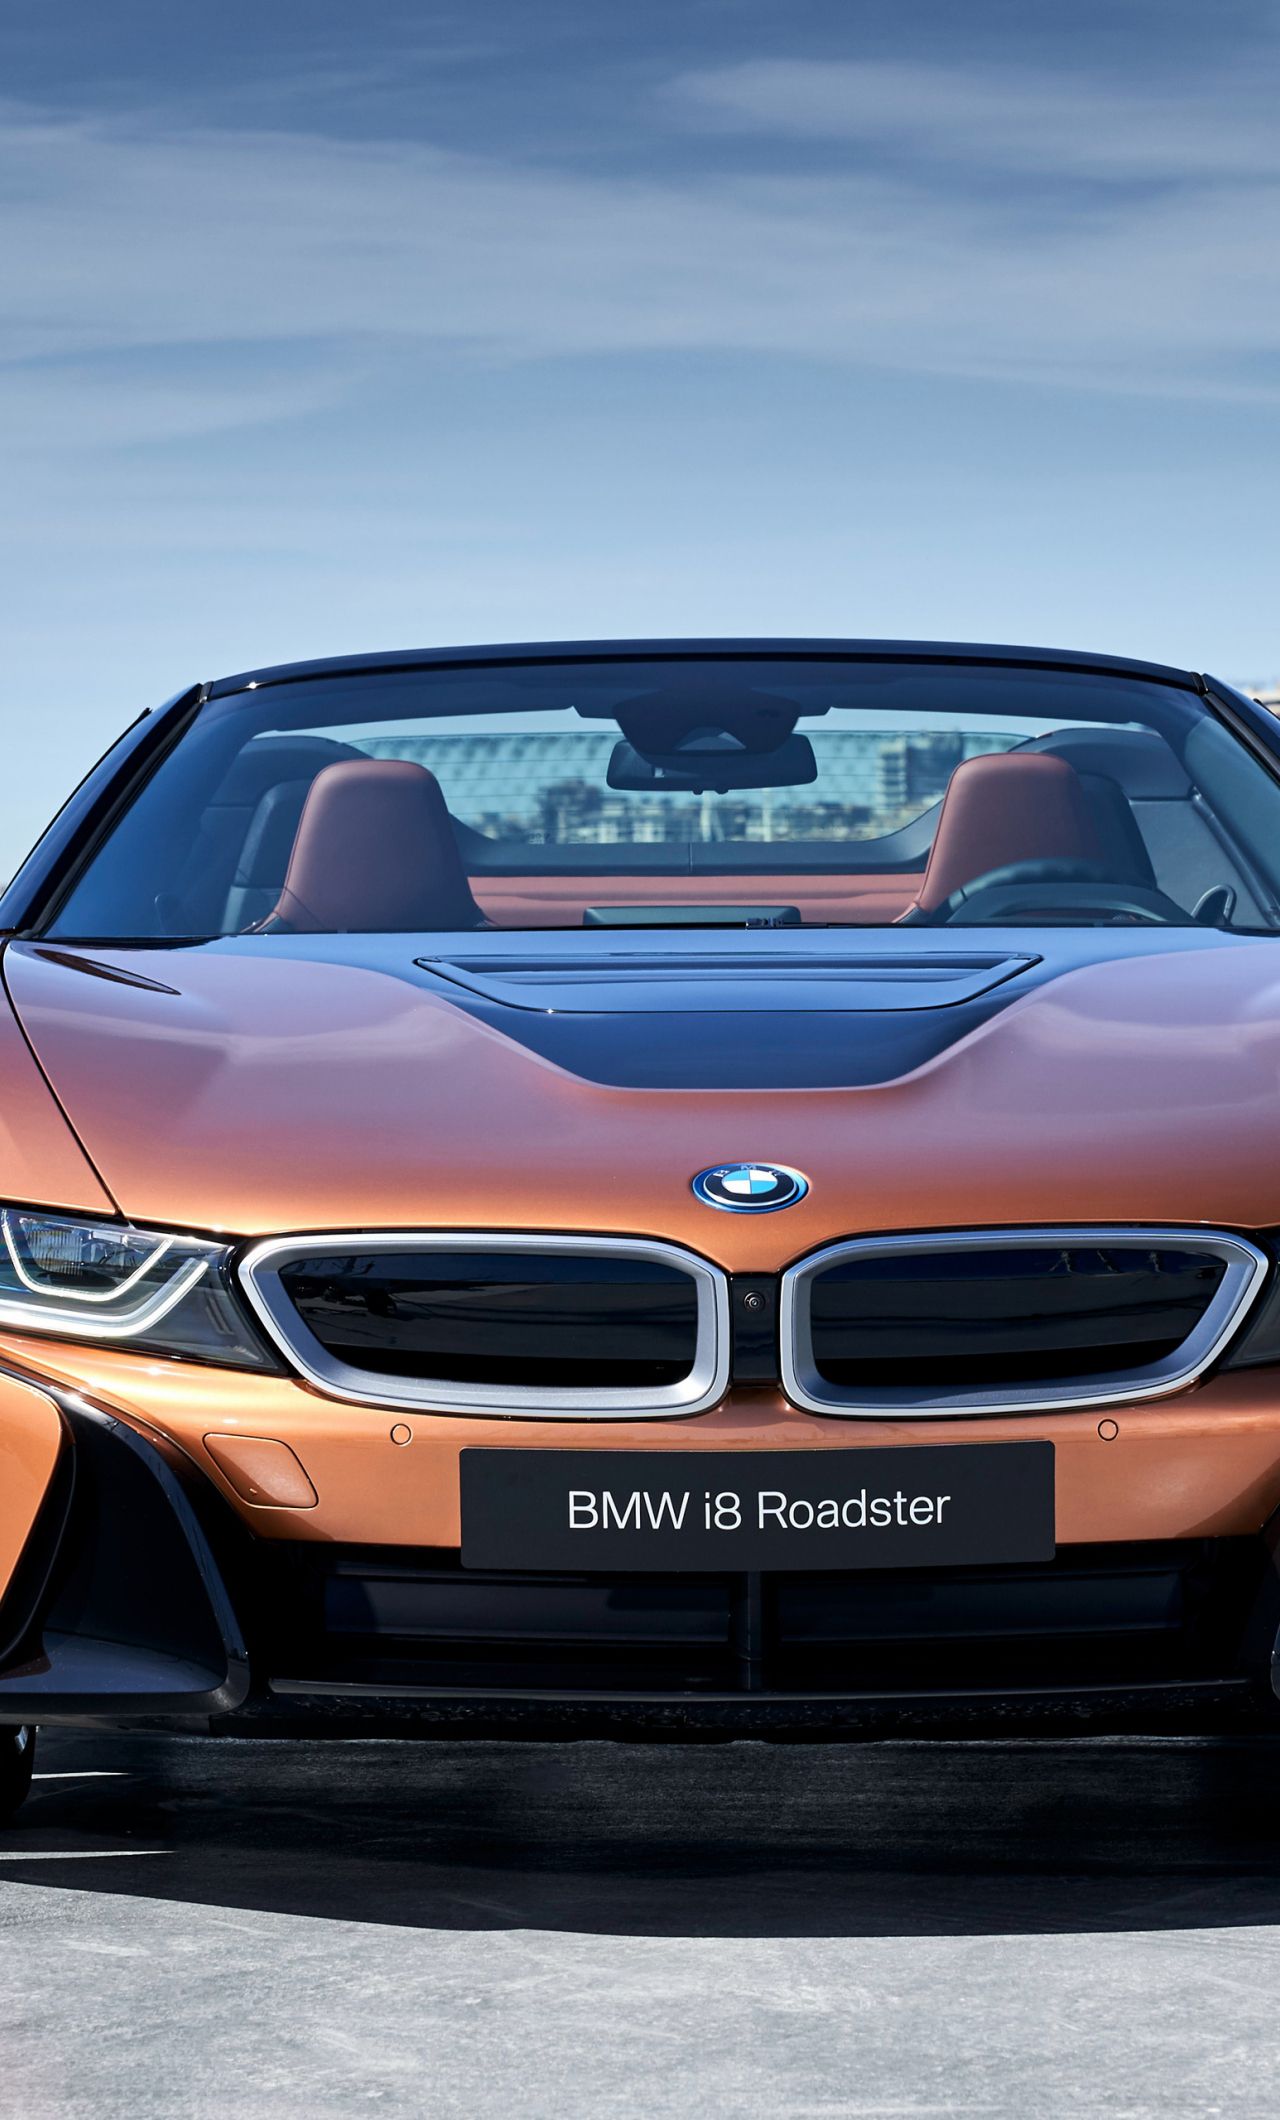 Download 1280x2120 wallpaper 2018 bmw i8 roadster, at port, iphone 6 plus, 1280x2120 HD image, background, 7429